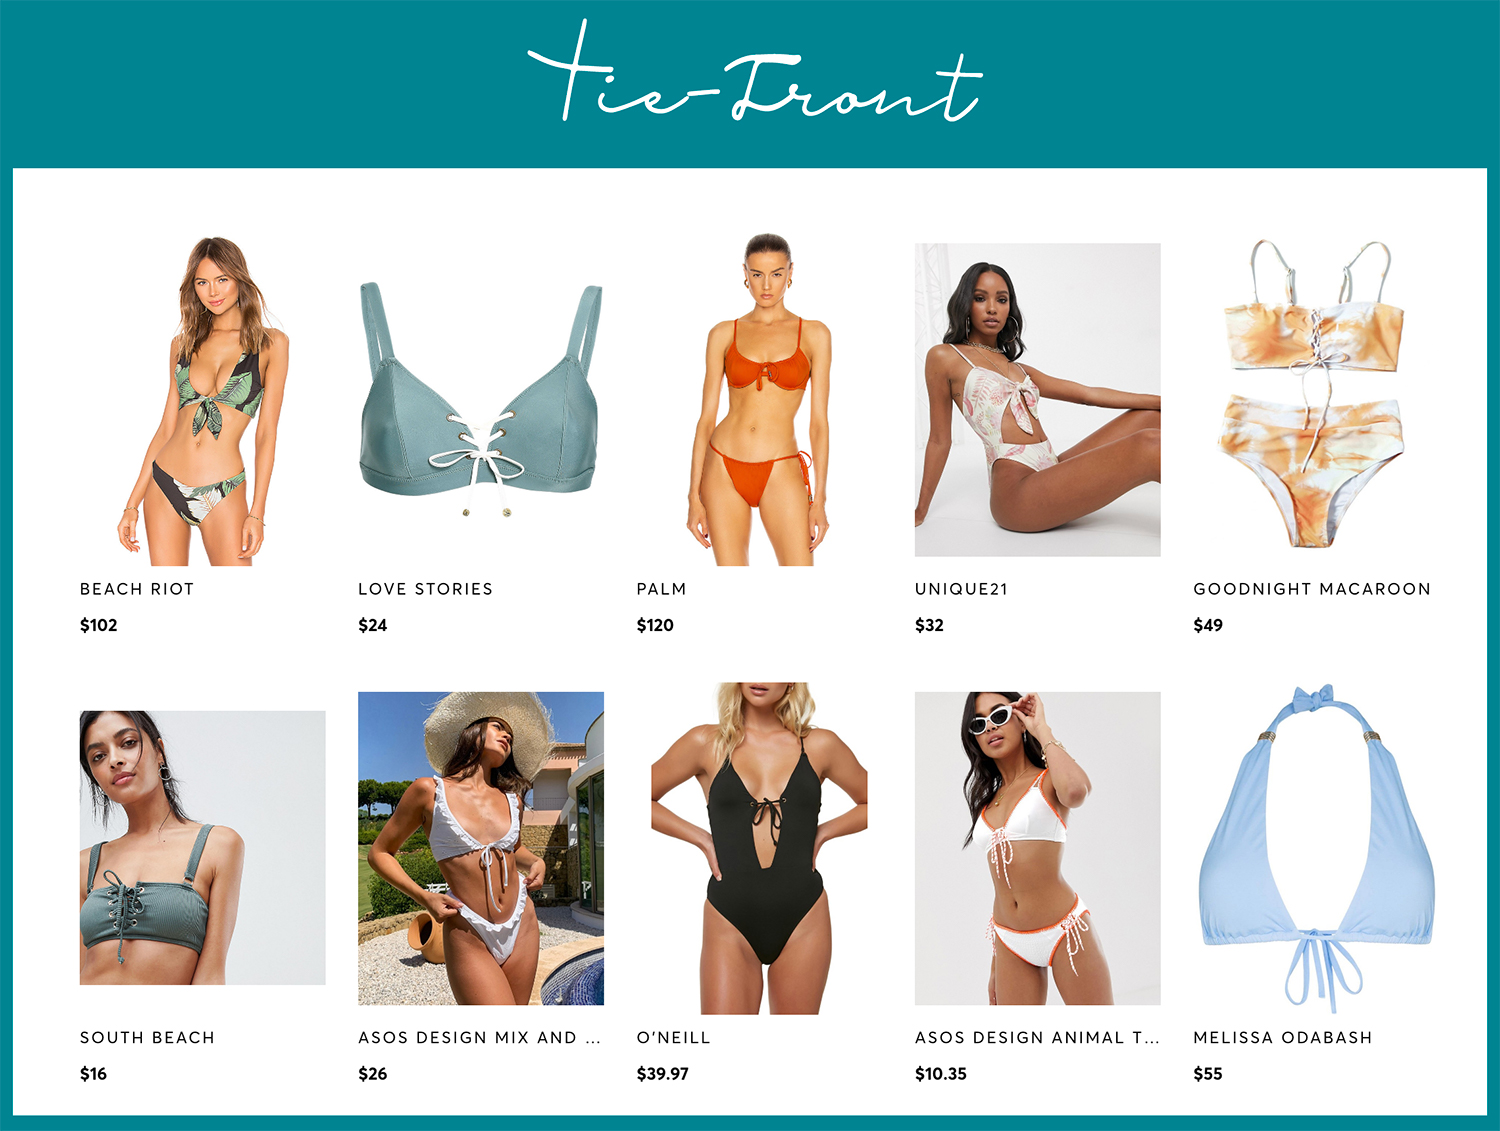 Top 5 Swimsuits That Look Best on Women With Small Breast